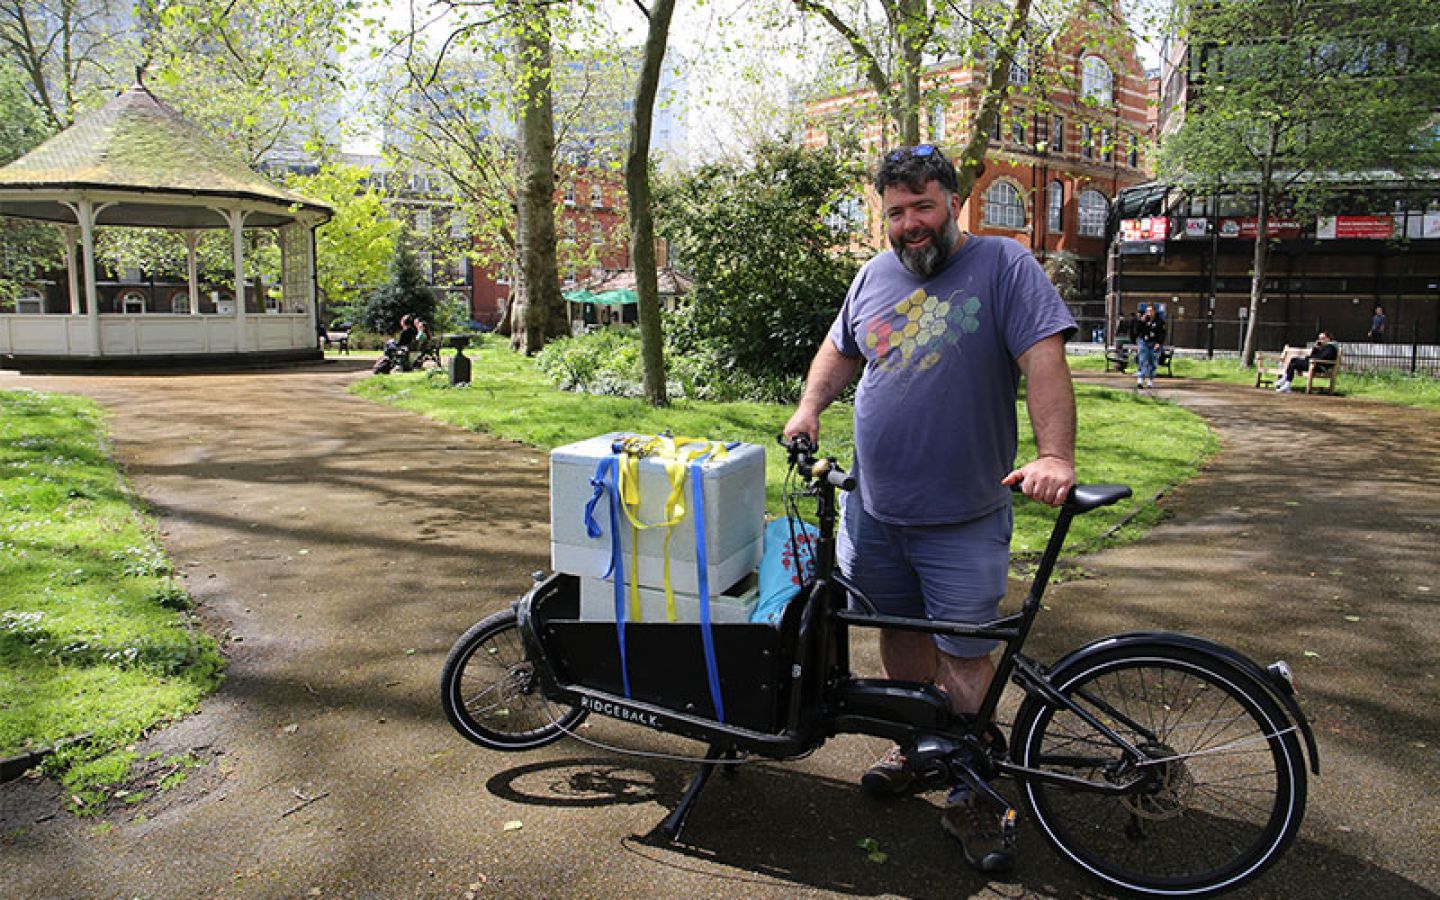 City's beekeeper, Barnaby Shaw from Bee Urban, transports a new colony of bees on a bike through Northampton Square